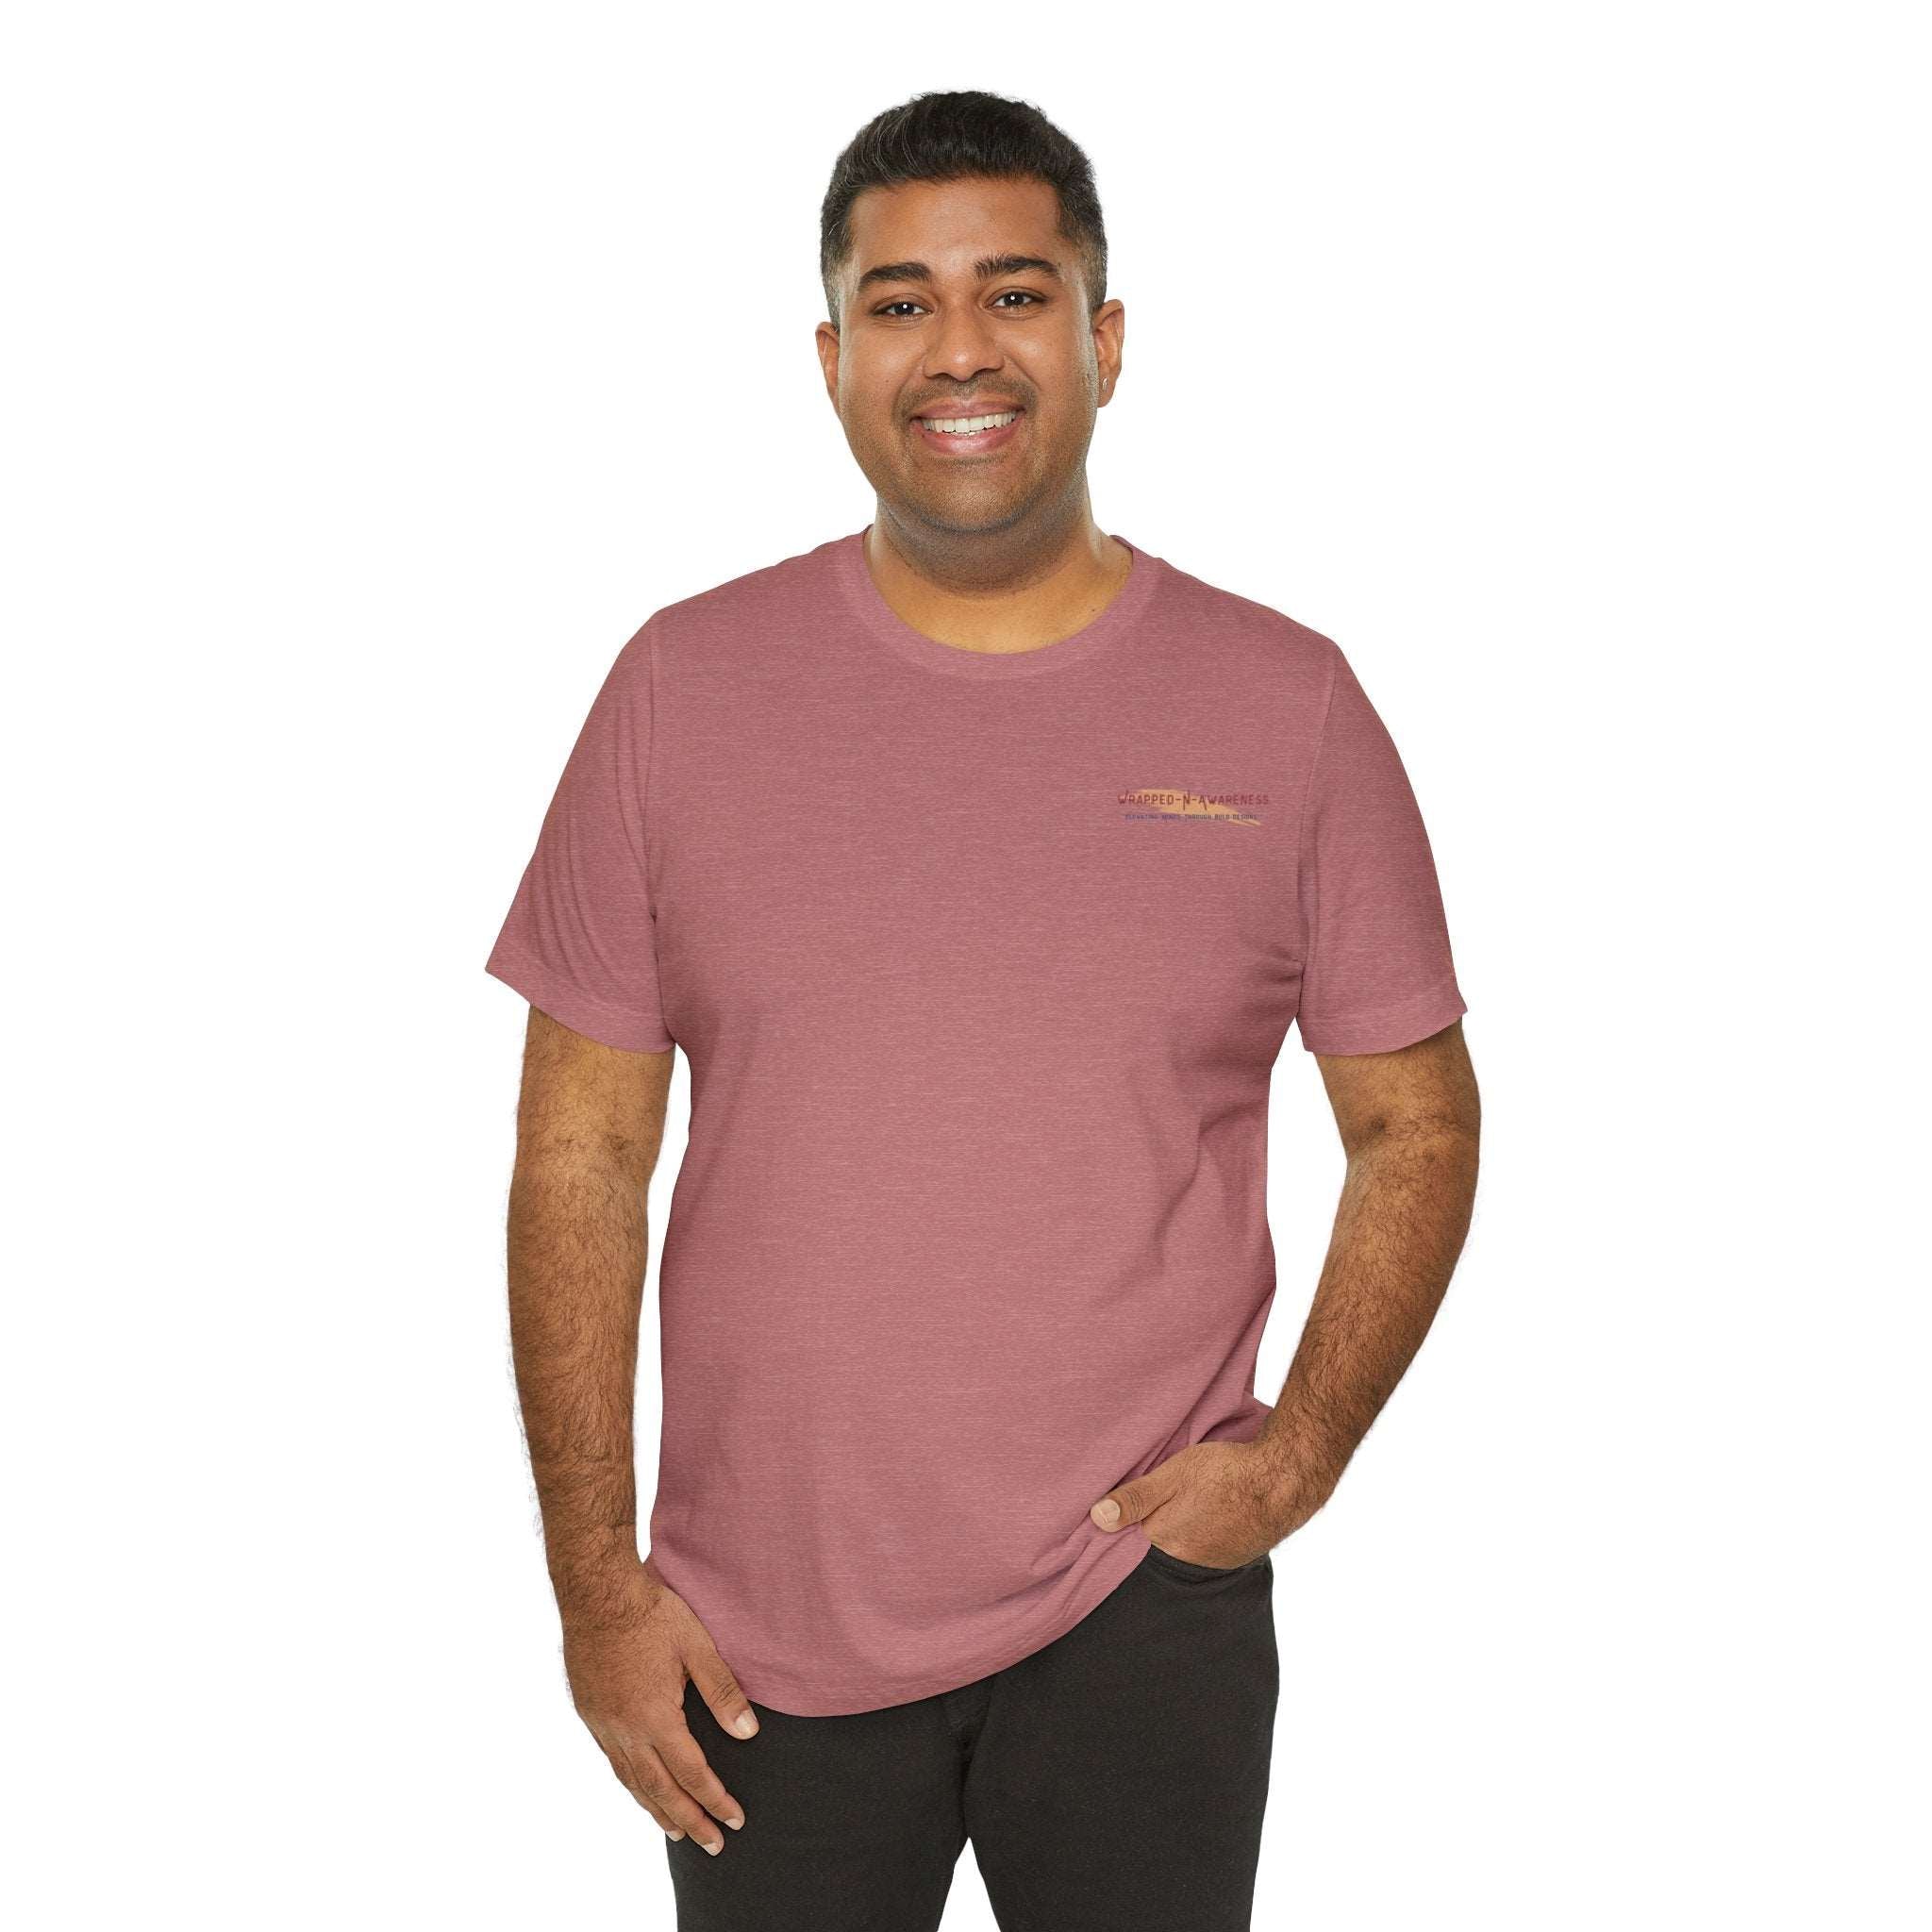 Find Your Balance Jersey Tee - Bella+Canvas 3001 Heather Mauve Airlume Cotton Bella+Canvas 3001 Crew Neckline Jersey Short Sleeve Lightweight Fabric Mental Health Support Retail Fit Tear-away Label Tee Unisex Tee T-Shirt 16266977662474746375_2048_66d99f42-9d1e-48a2-8cb3-9ec2a2440cf5 Printify